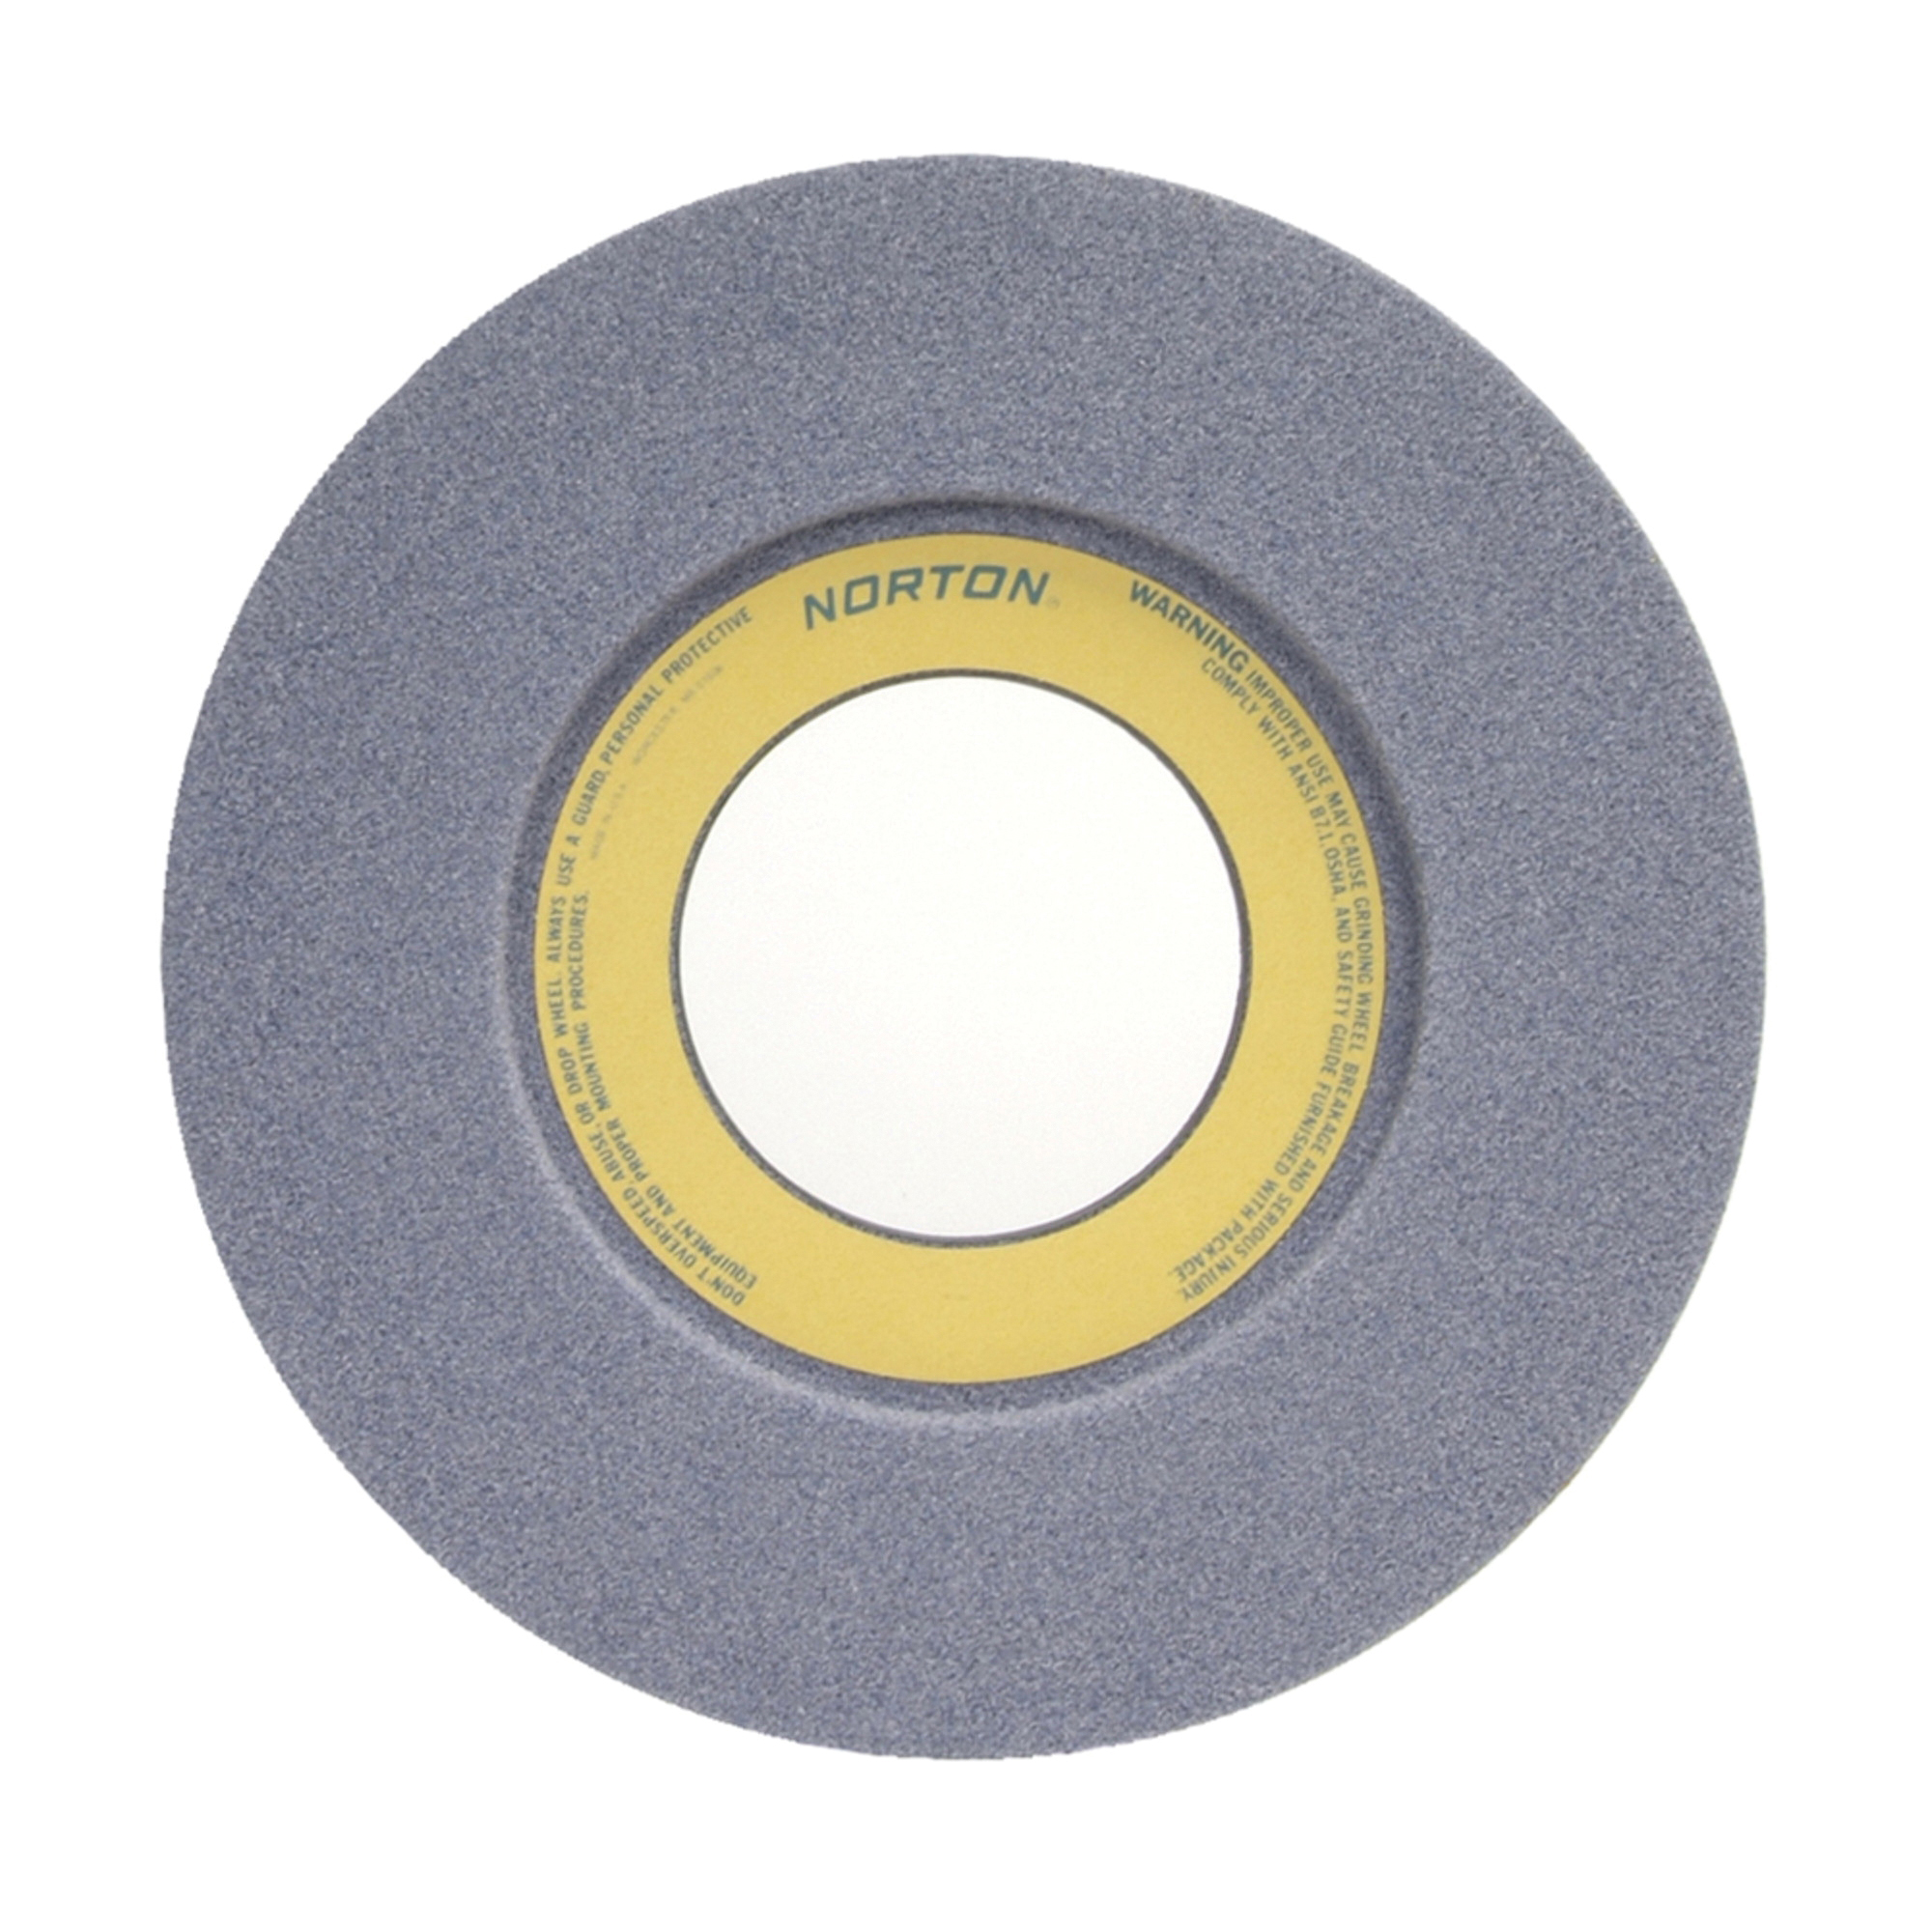 Norton® 66253364365 32A 1-Side Recessed Toolroom Wheel, 14 in Dia x 1-1/2 in THK, 5 in Center Hole, 60 Grit, Aluminum Oxide Abrasive